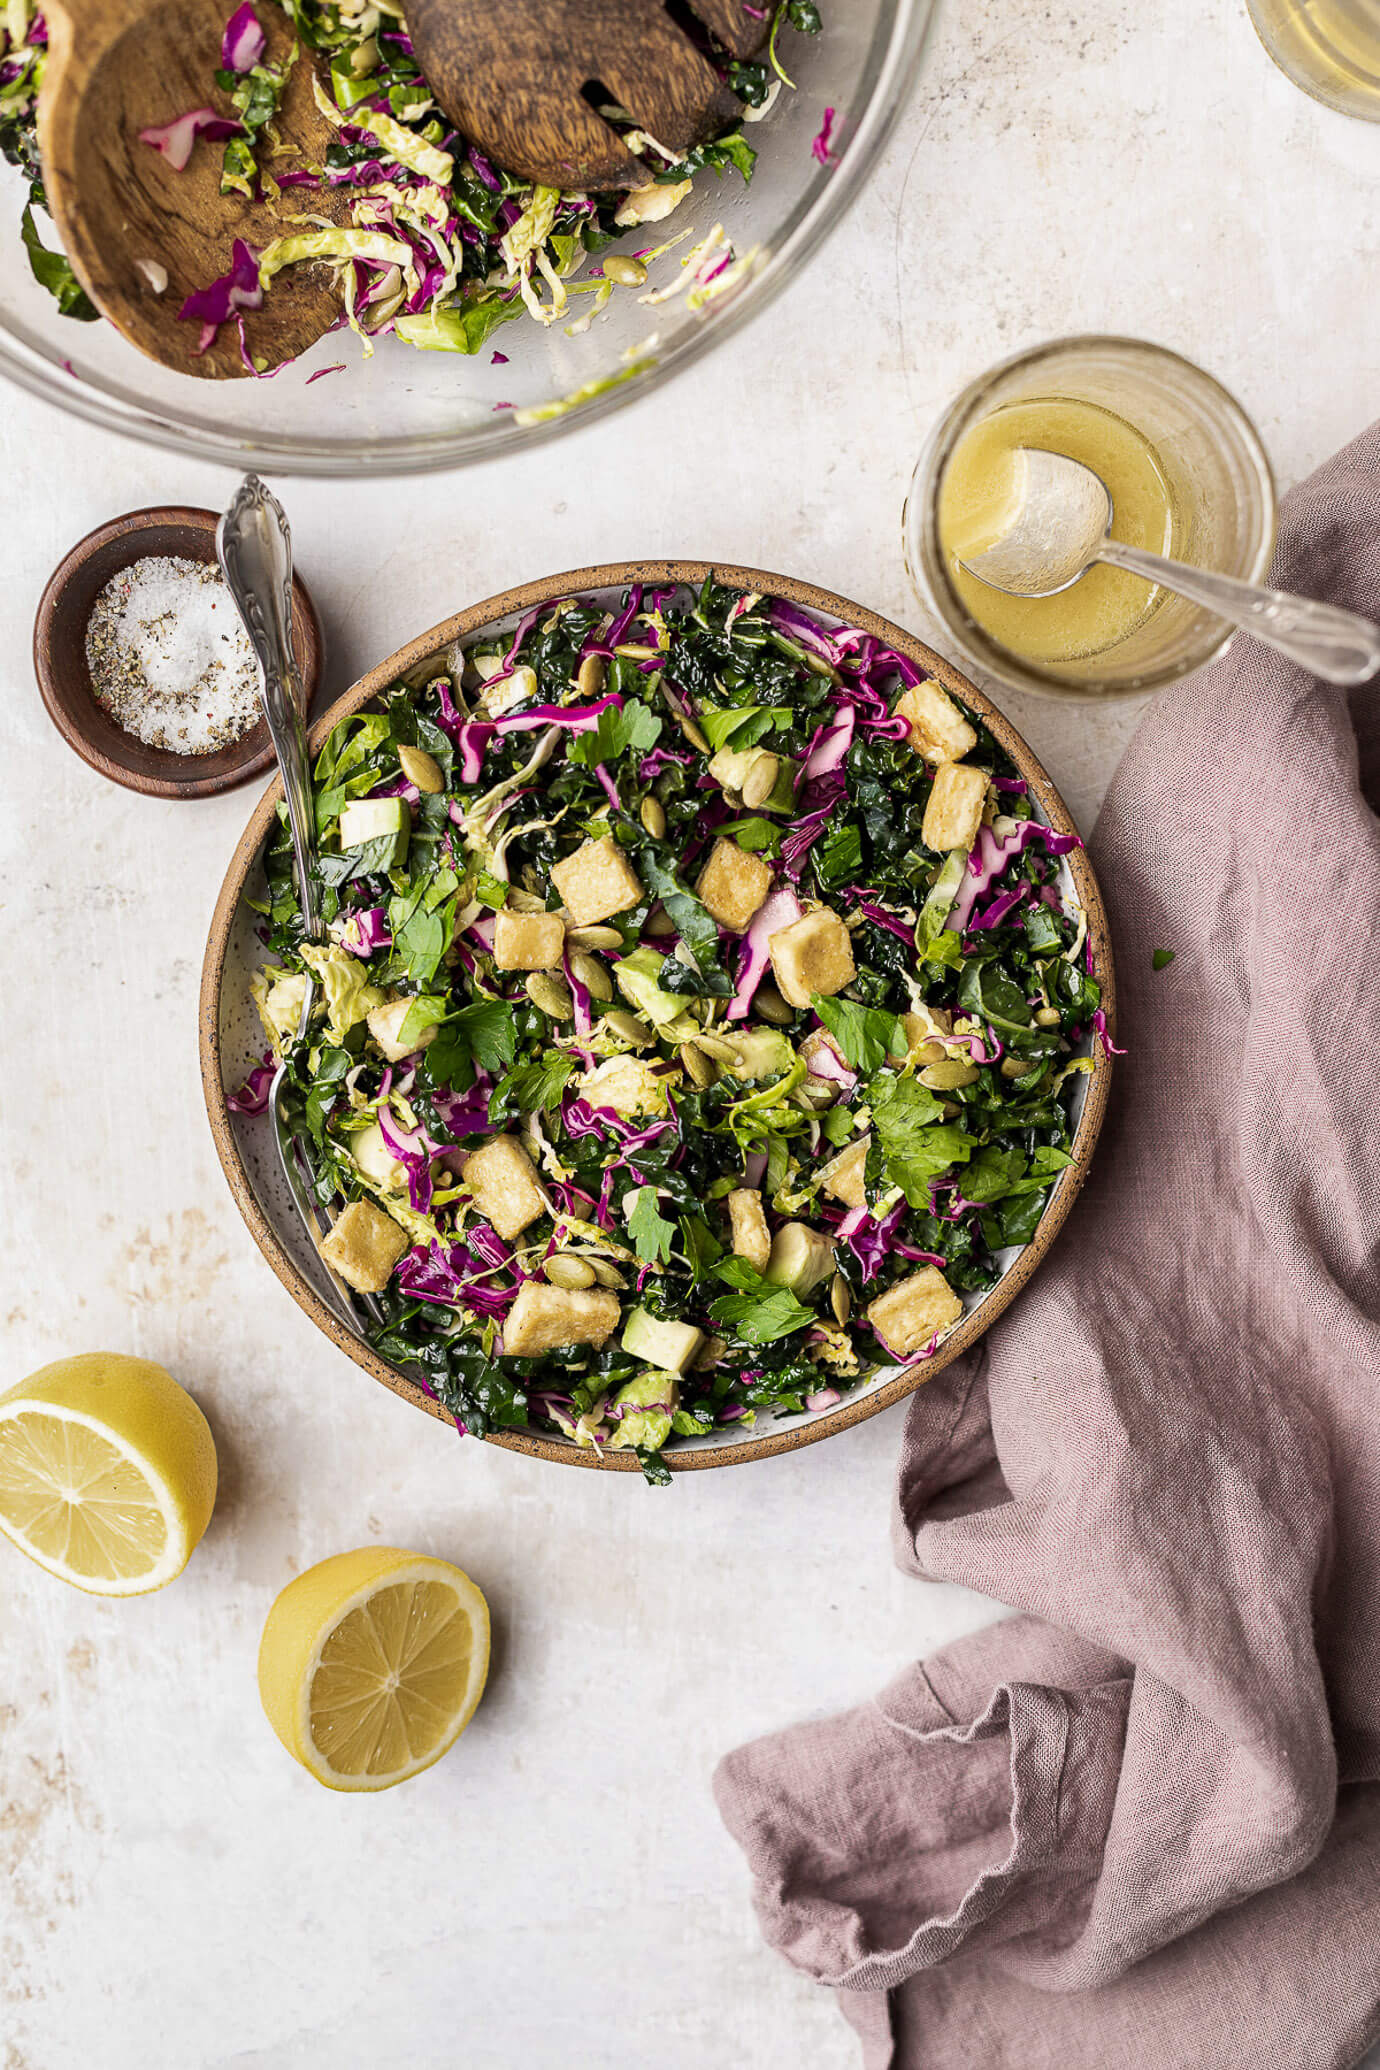 Shredded Kale and Brussels Sprout Salad for Hormone Balance